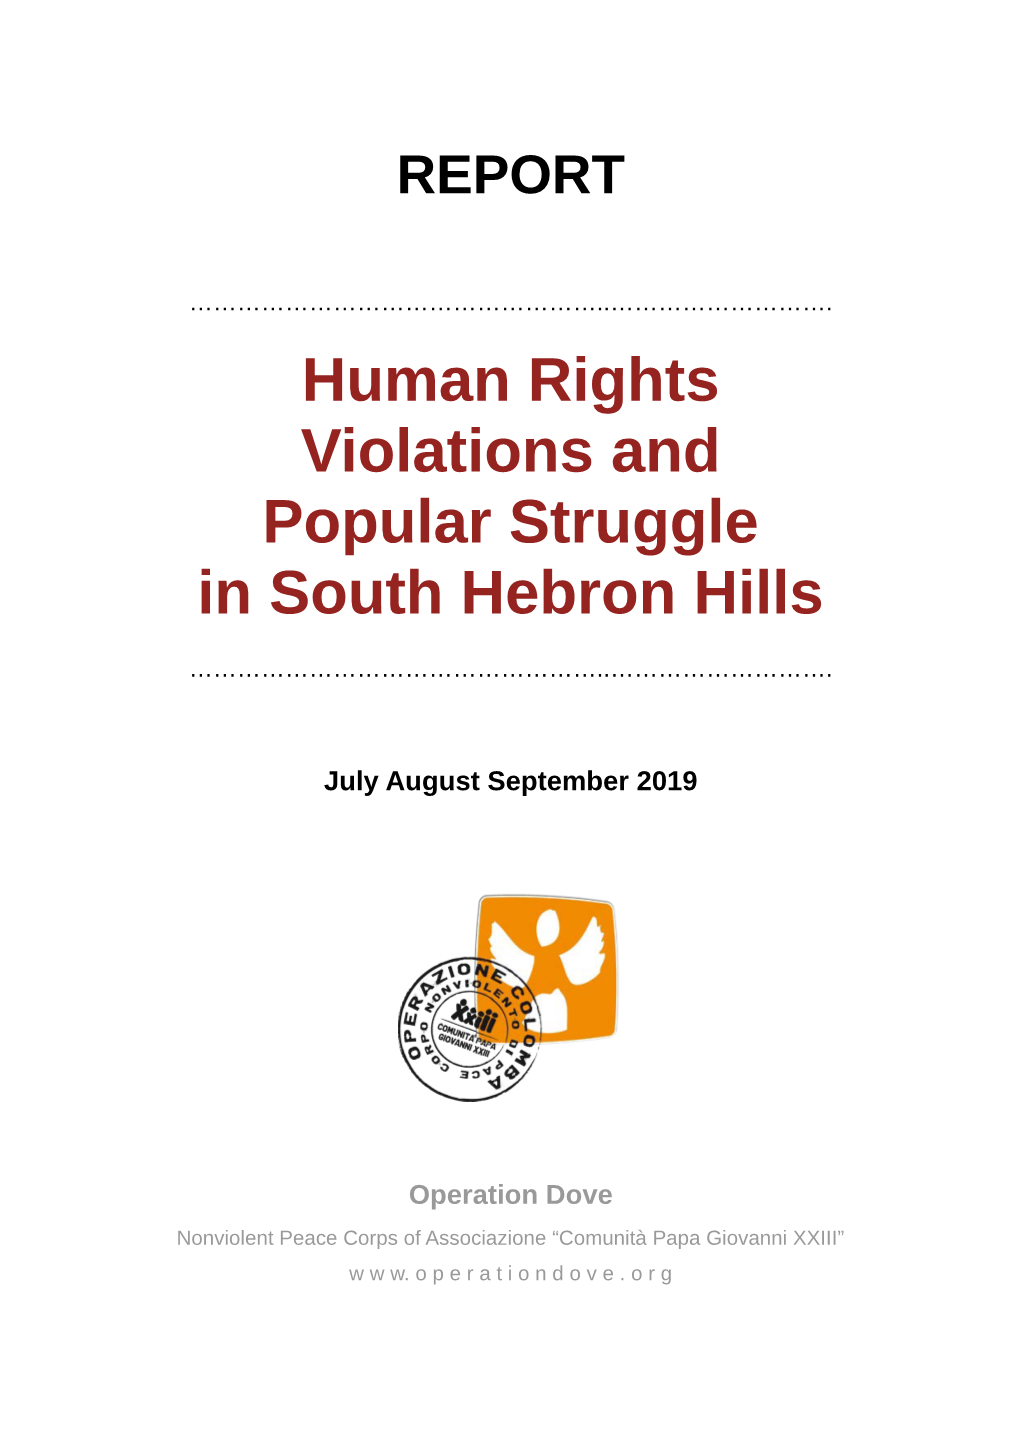 Human Rights Violations and Popular Struggle in South Hebron Hills